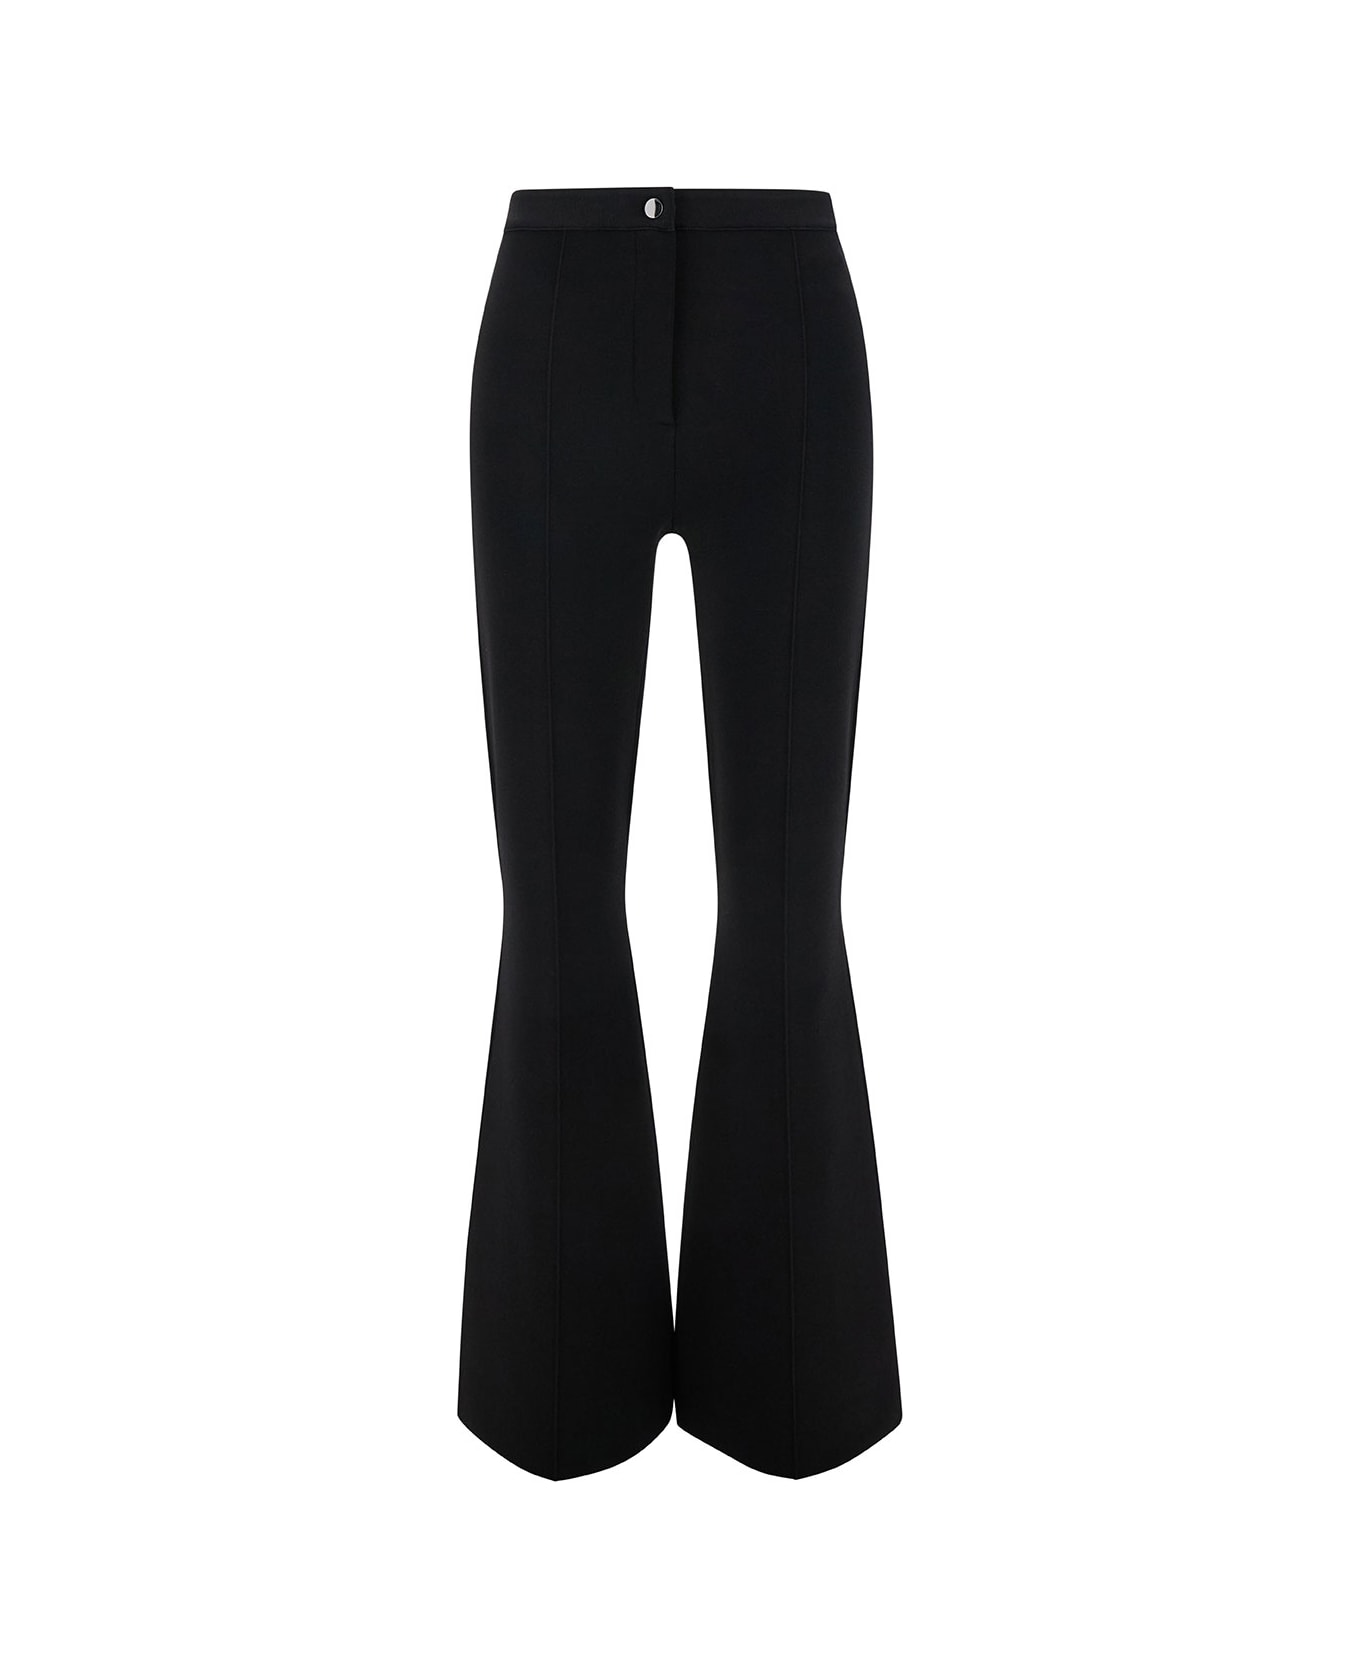 Theory Black Flared Pants With Button Closure In Viscose Blend Woman - Black